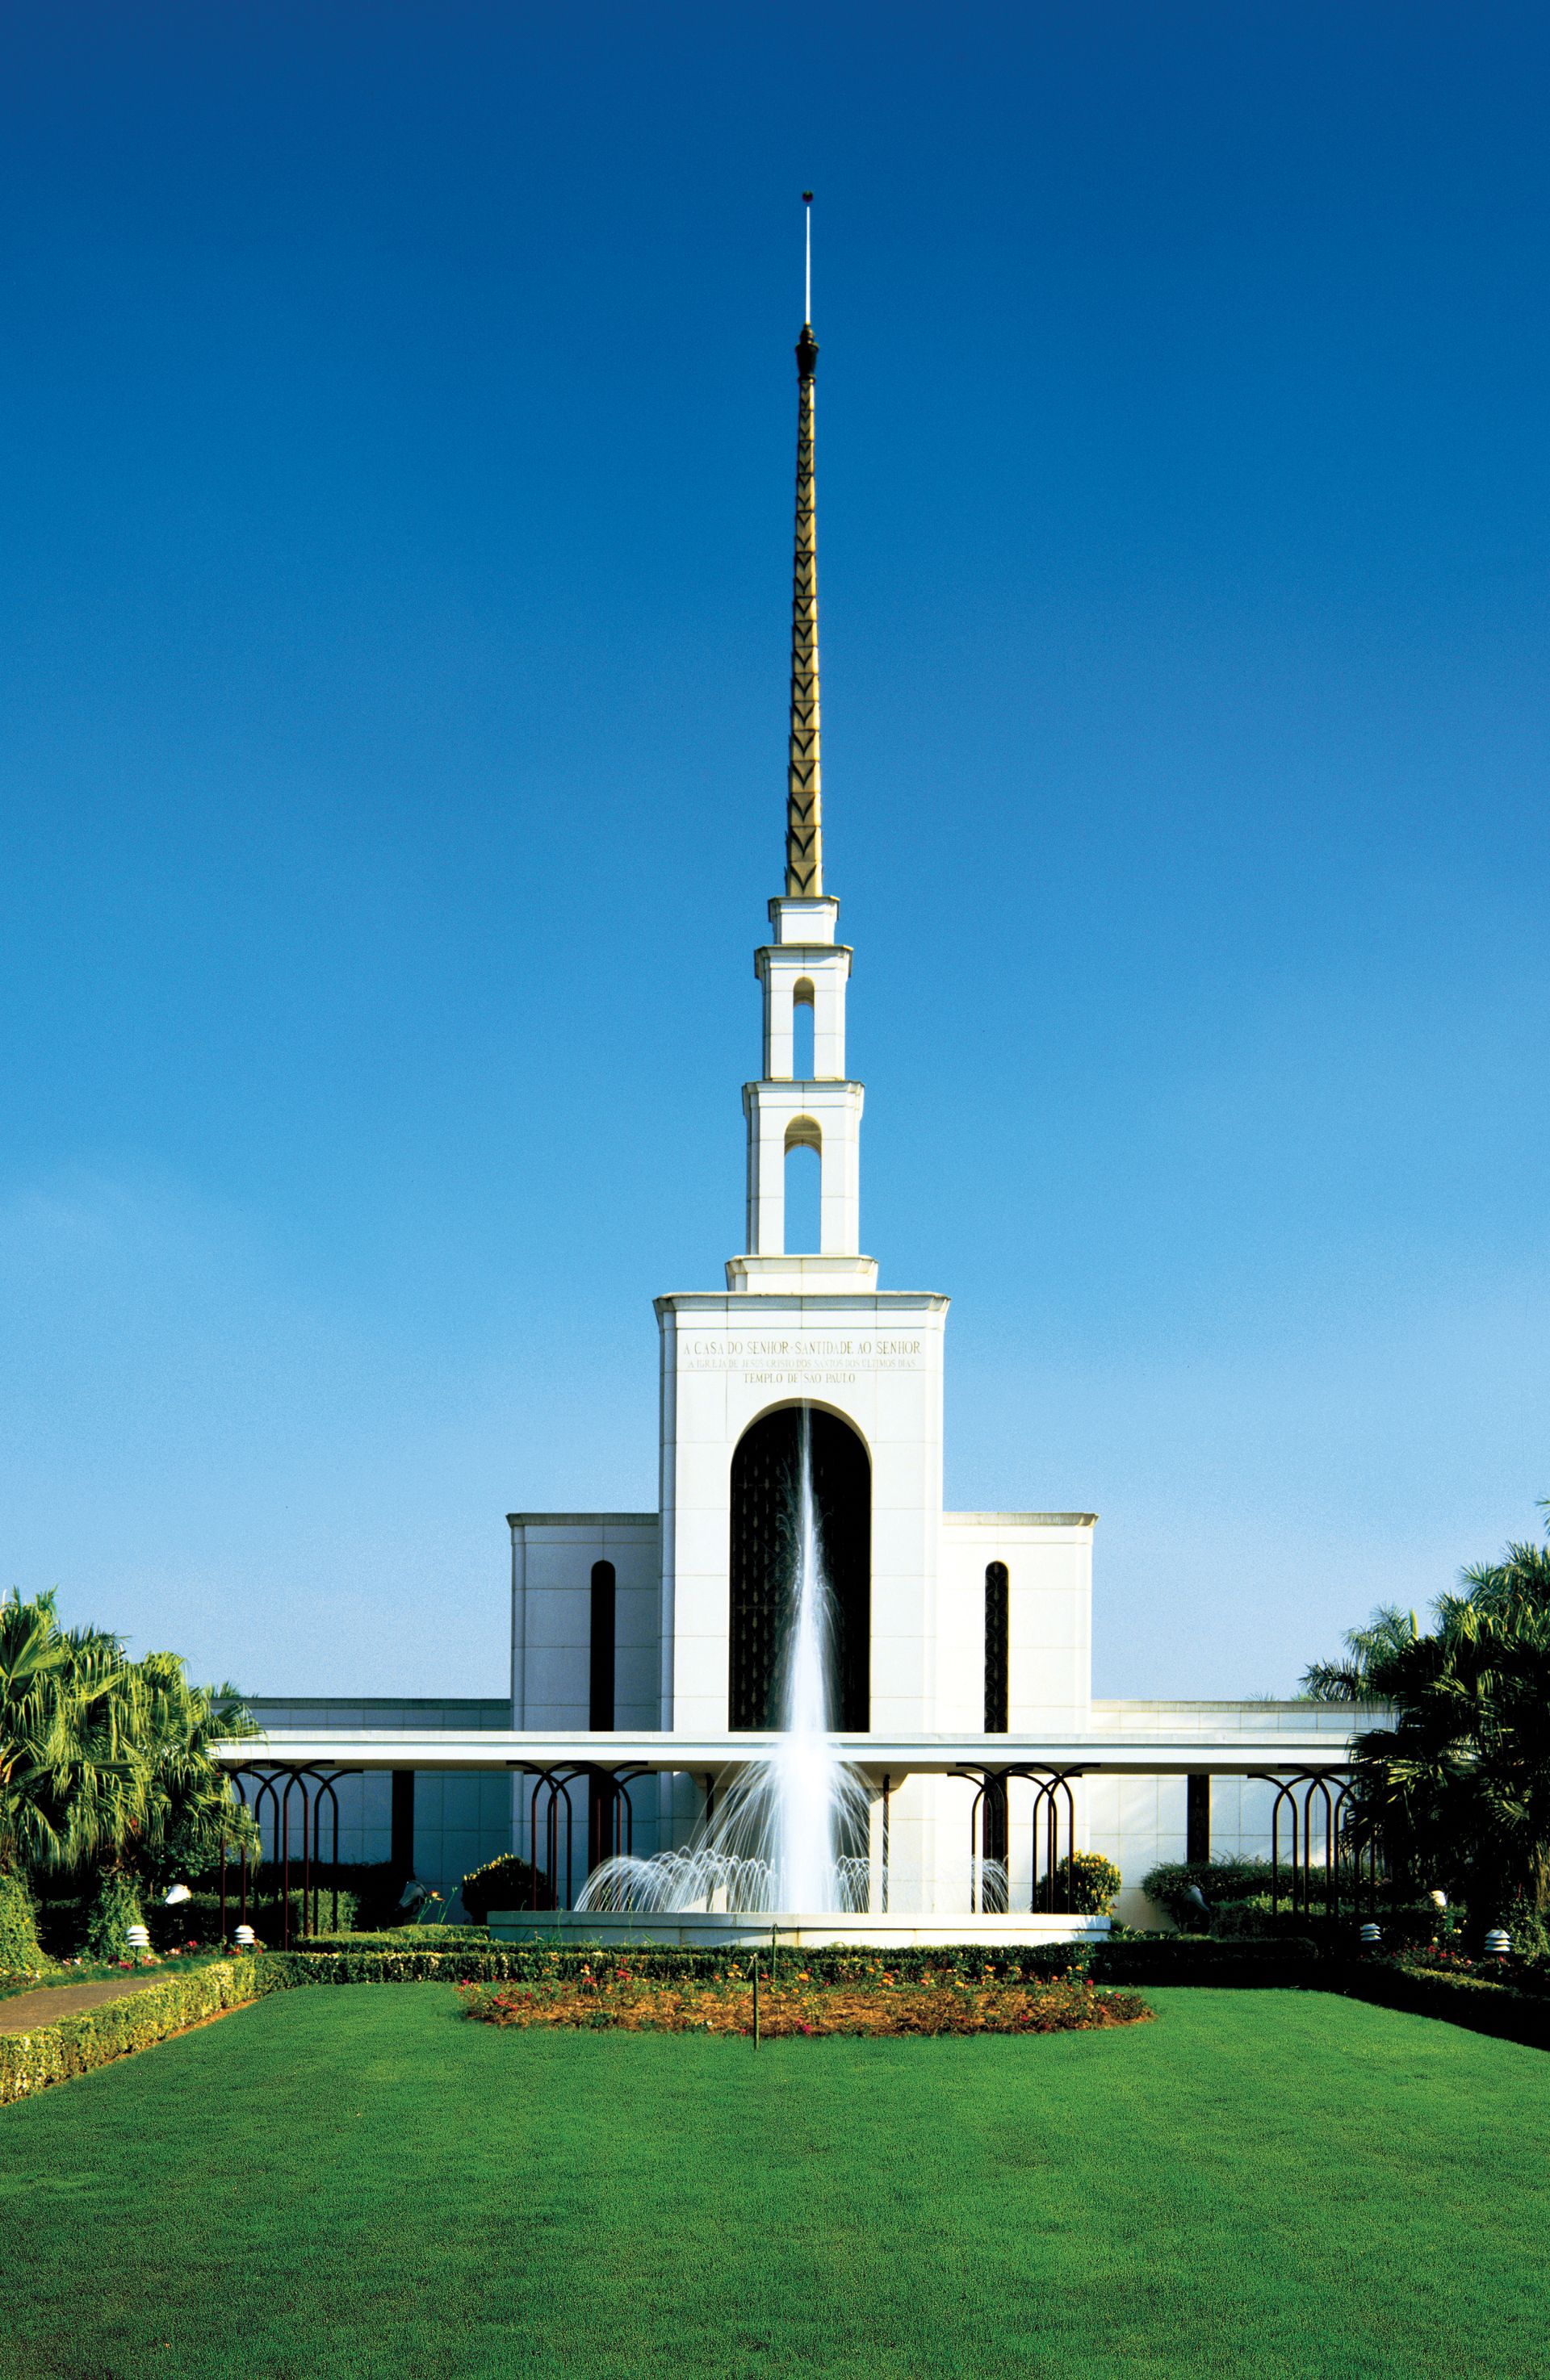 The São Paulo Brazil Temple, including the scenery, entrance, and fountain.